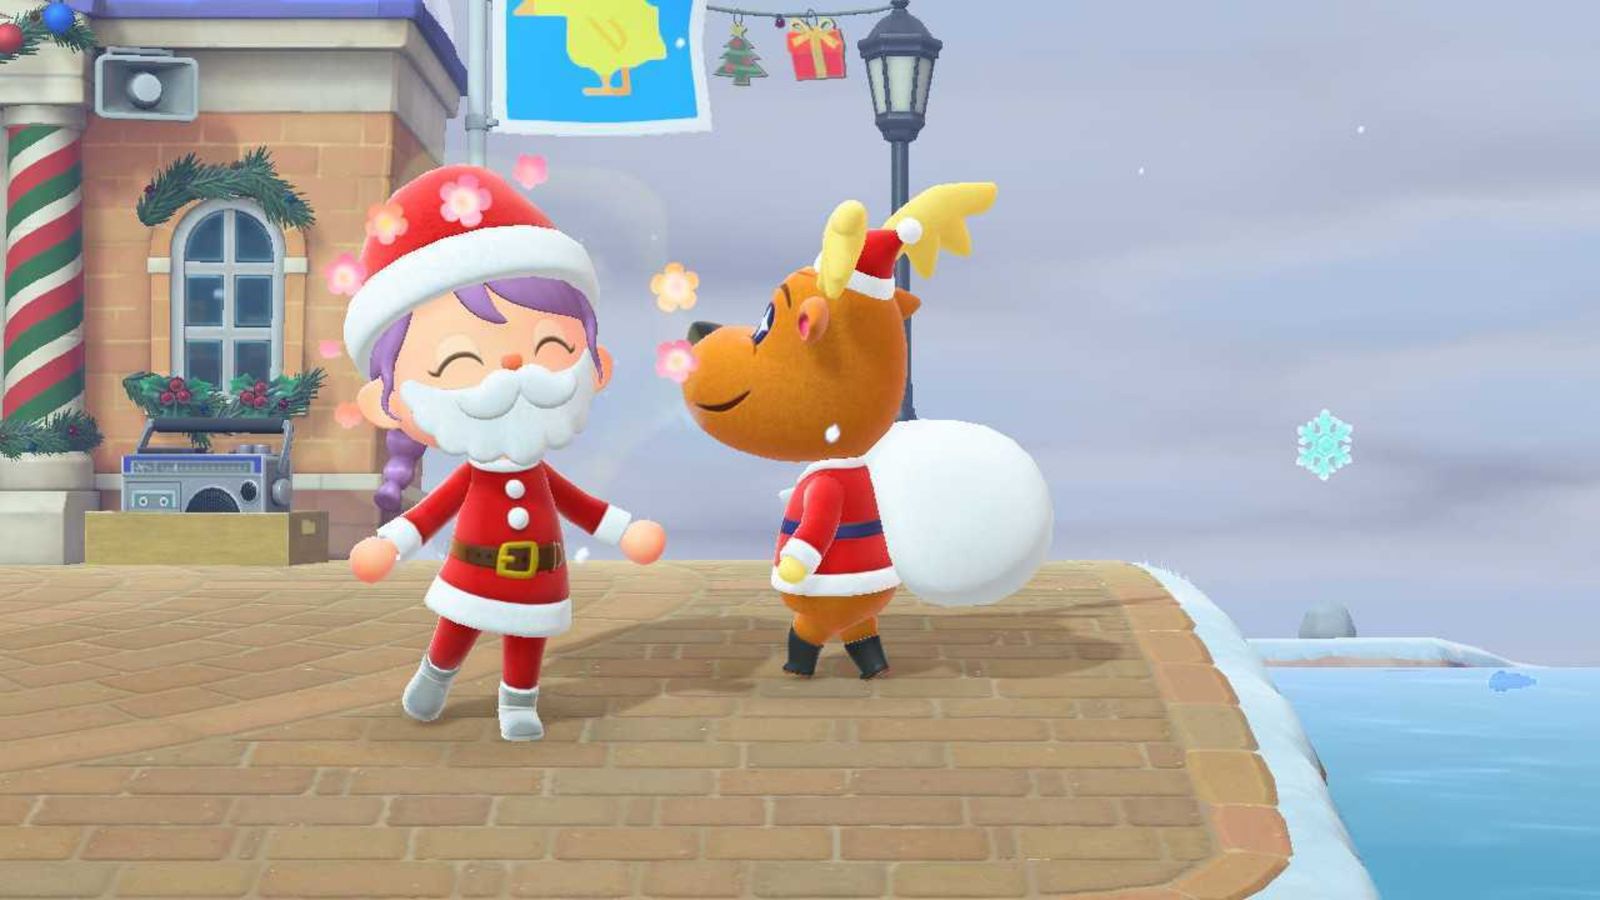 Animal Crossing New Horizons Toy Day Event Villager dressed as Santa about to talk to Jingle the reindeer in the plaza